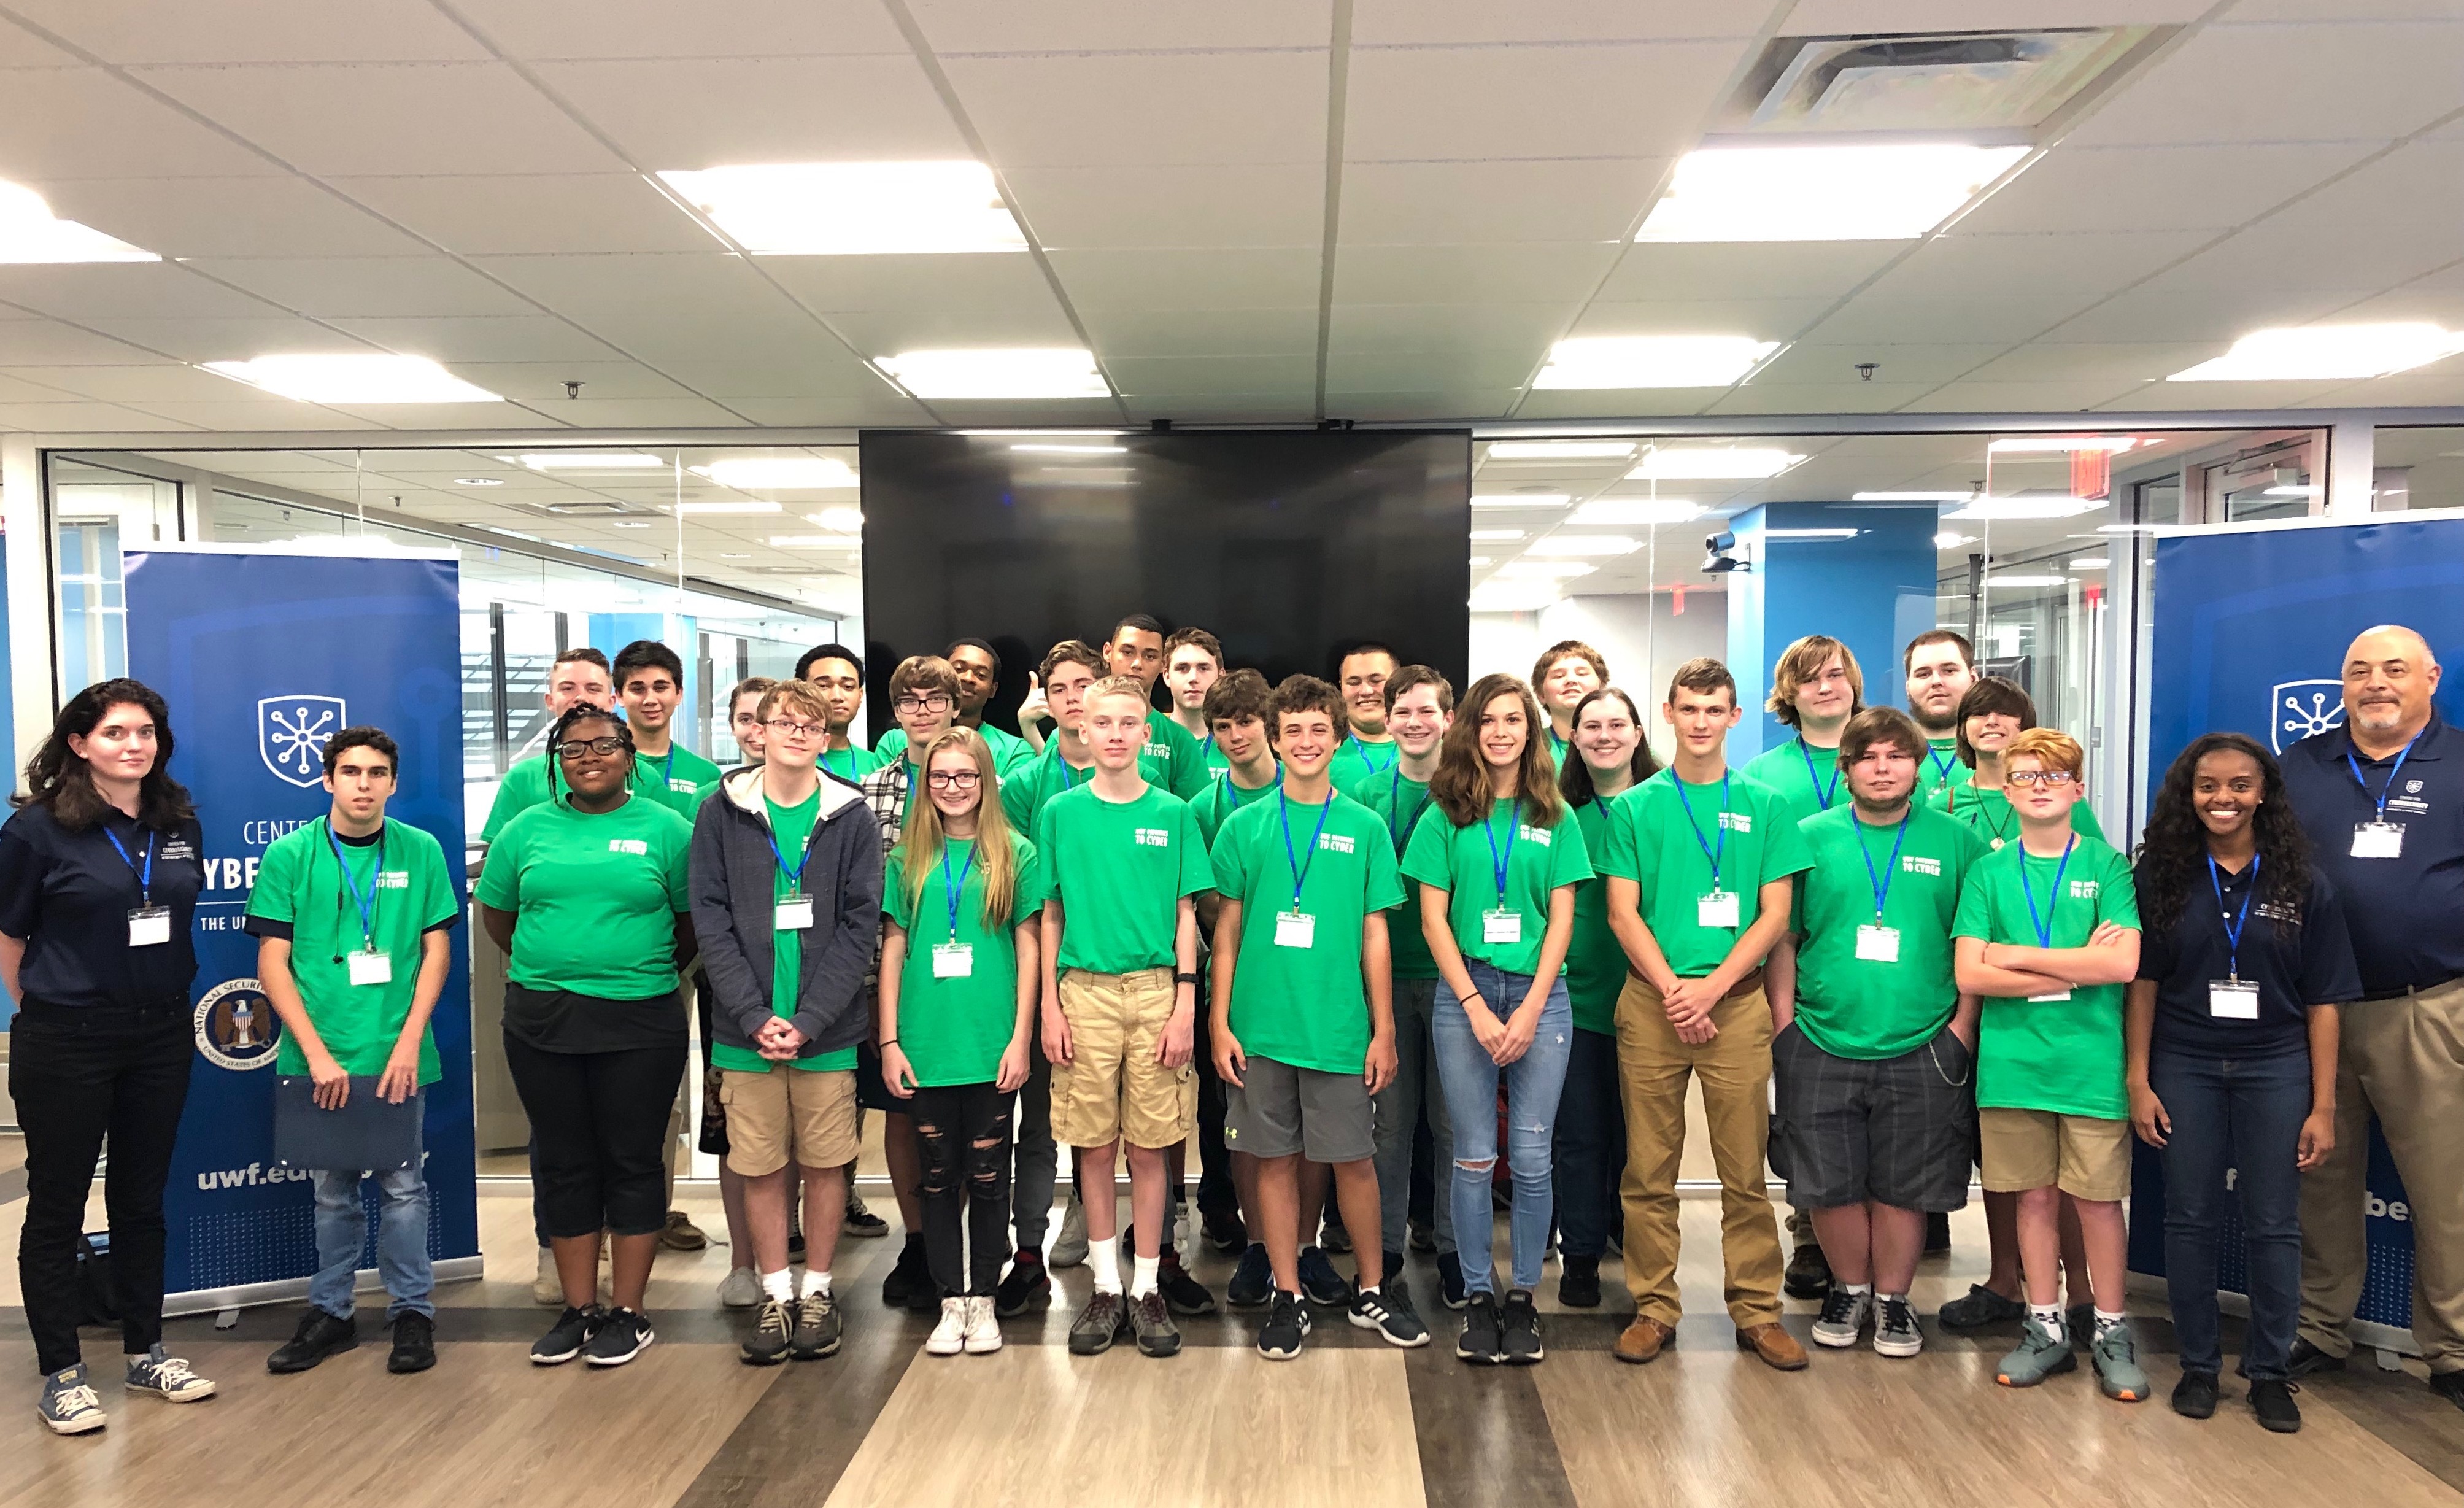 UWF Pathways to Cyber Student Camp participants